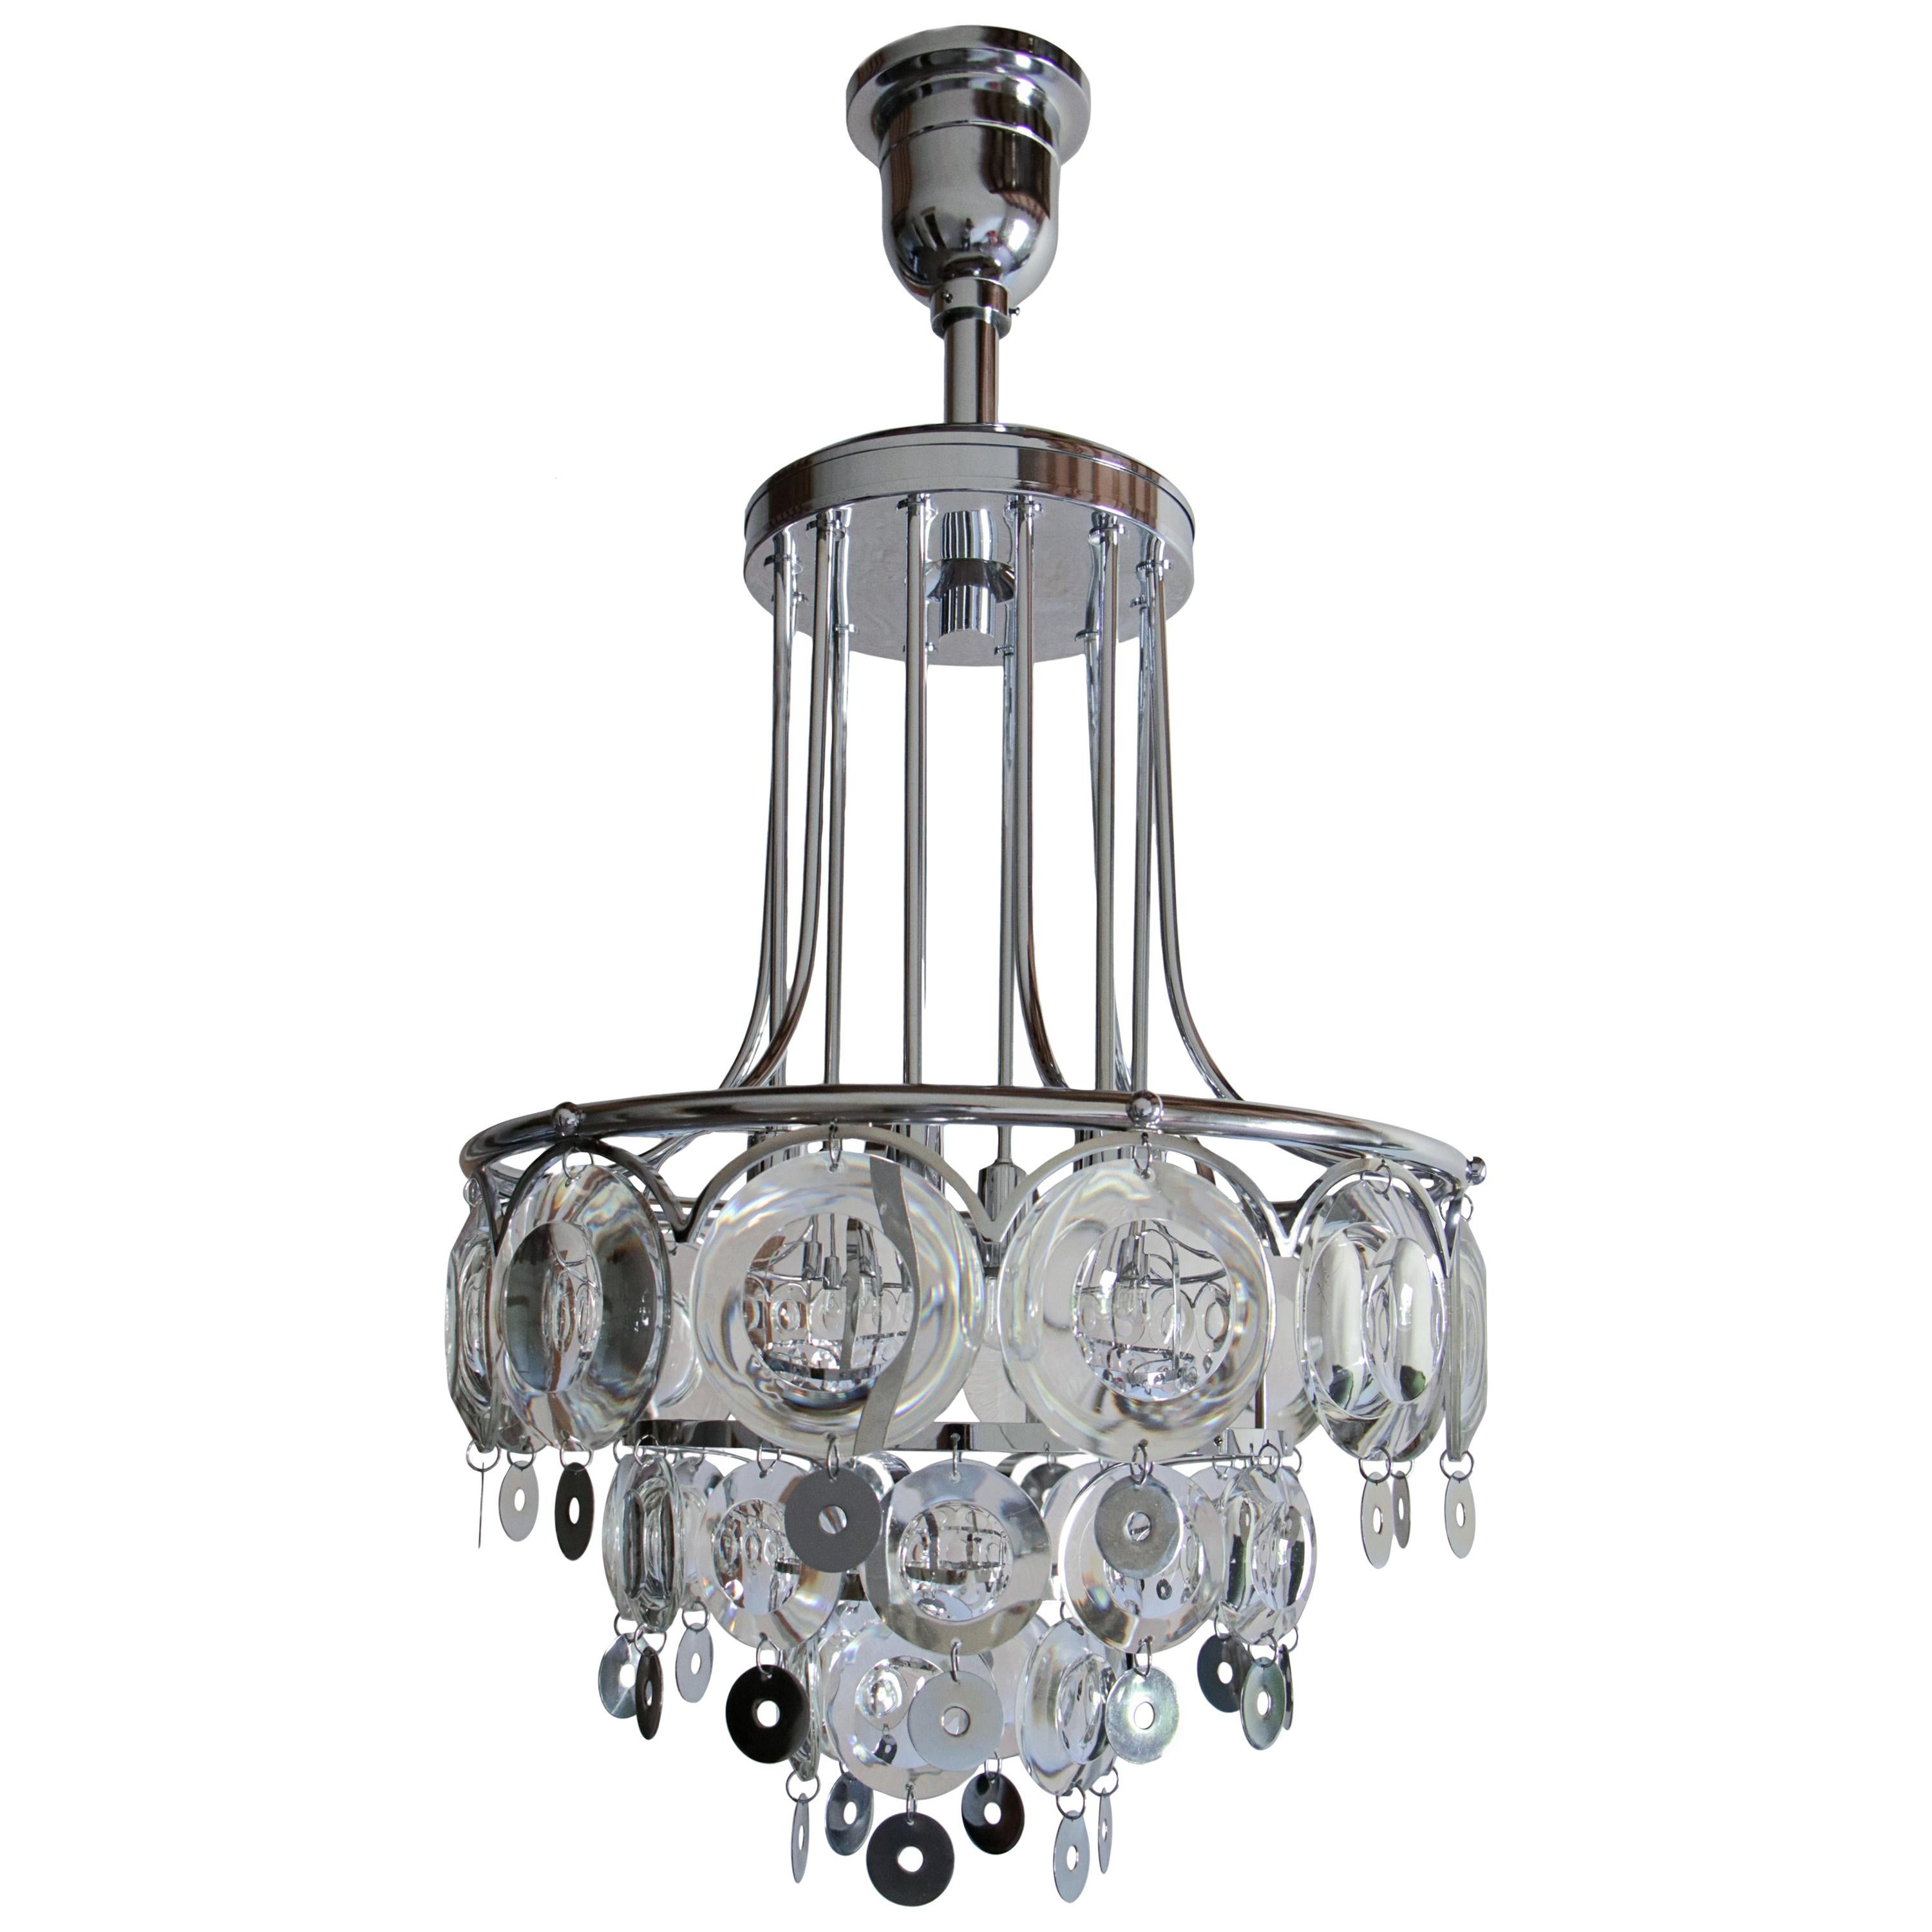 Splendid Italian chromed chandelier from the '70s, attributed to Oscar Torlasco. Structure made of chromed brass, chromed steel, and lenticular glass. Six functional lights, E14 format. An elegant and decorative piece of furniture, capable of giving